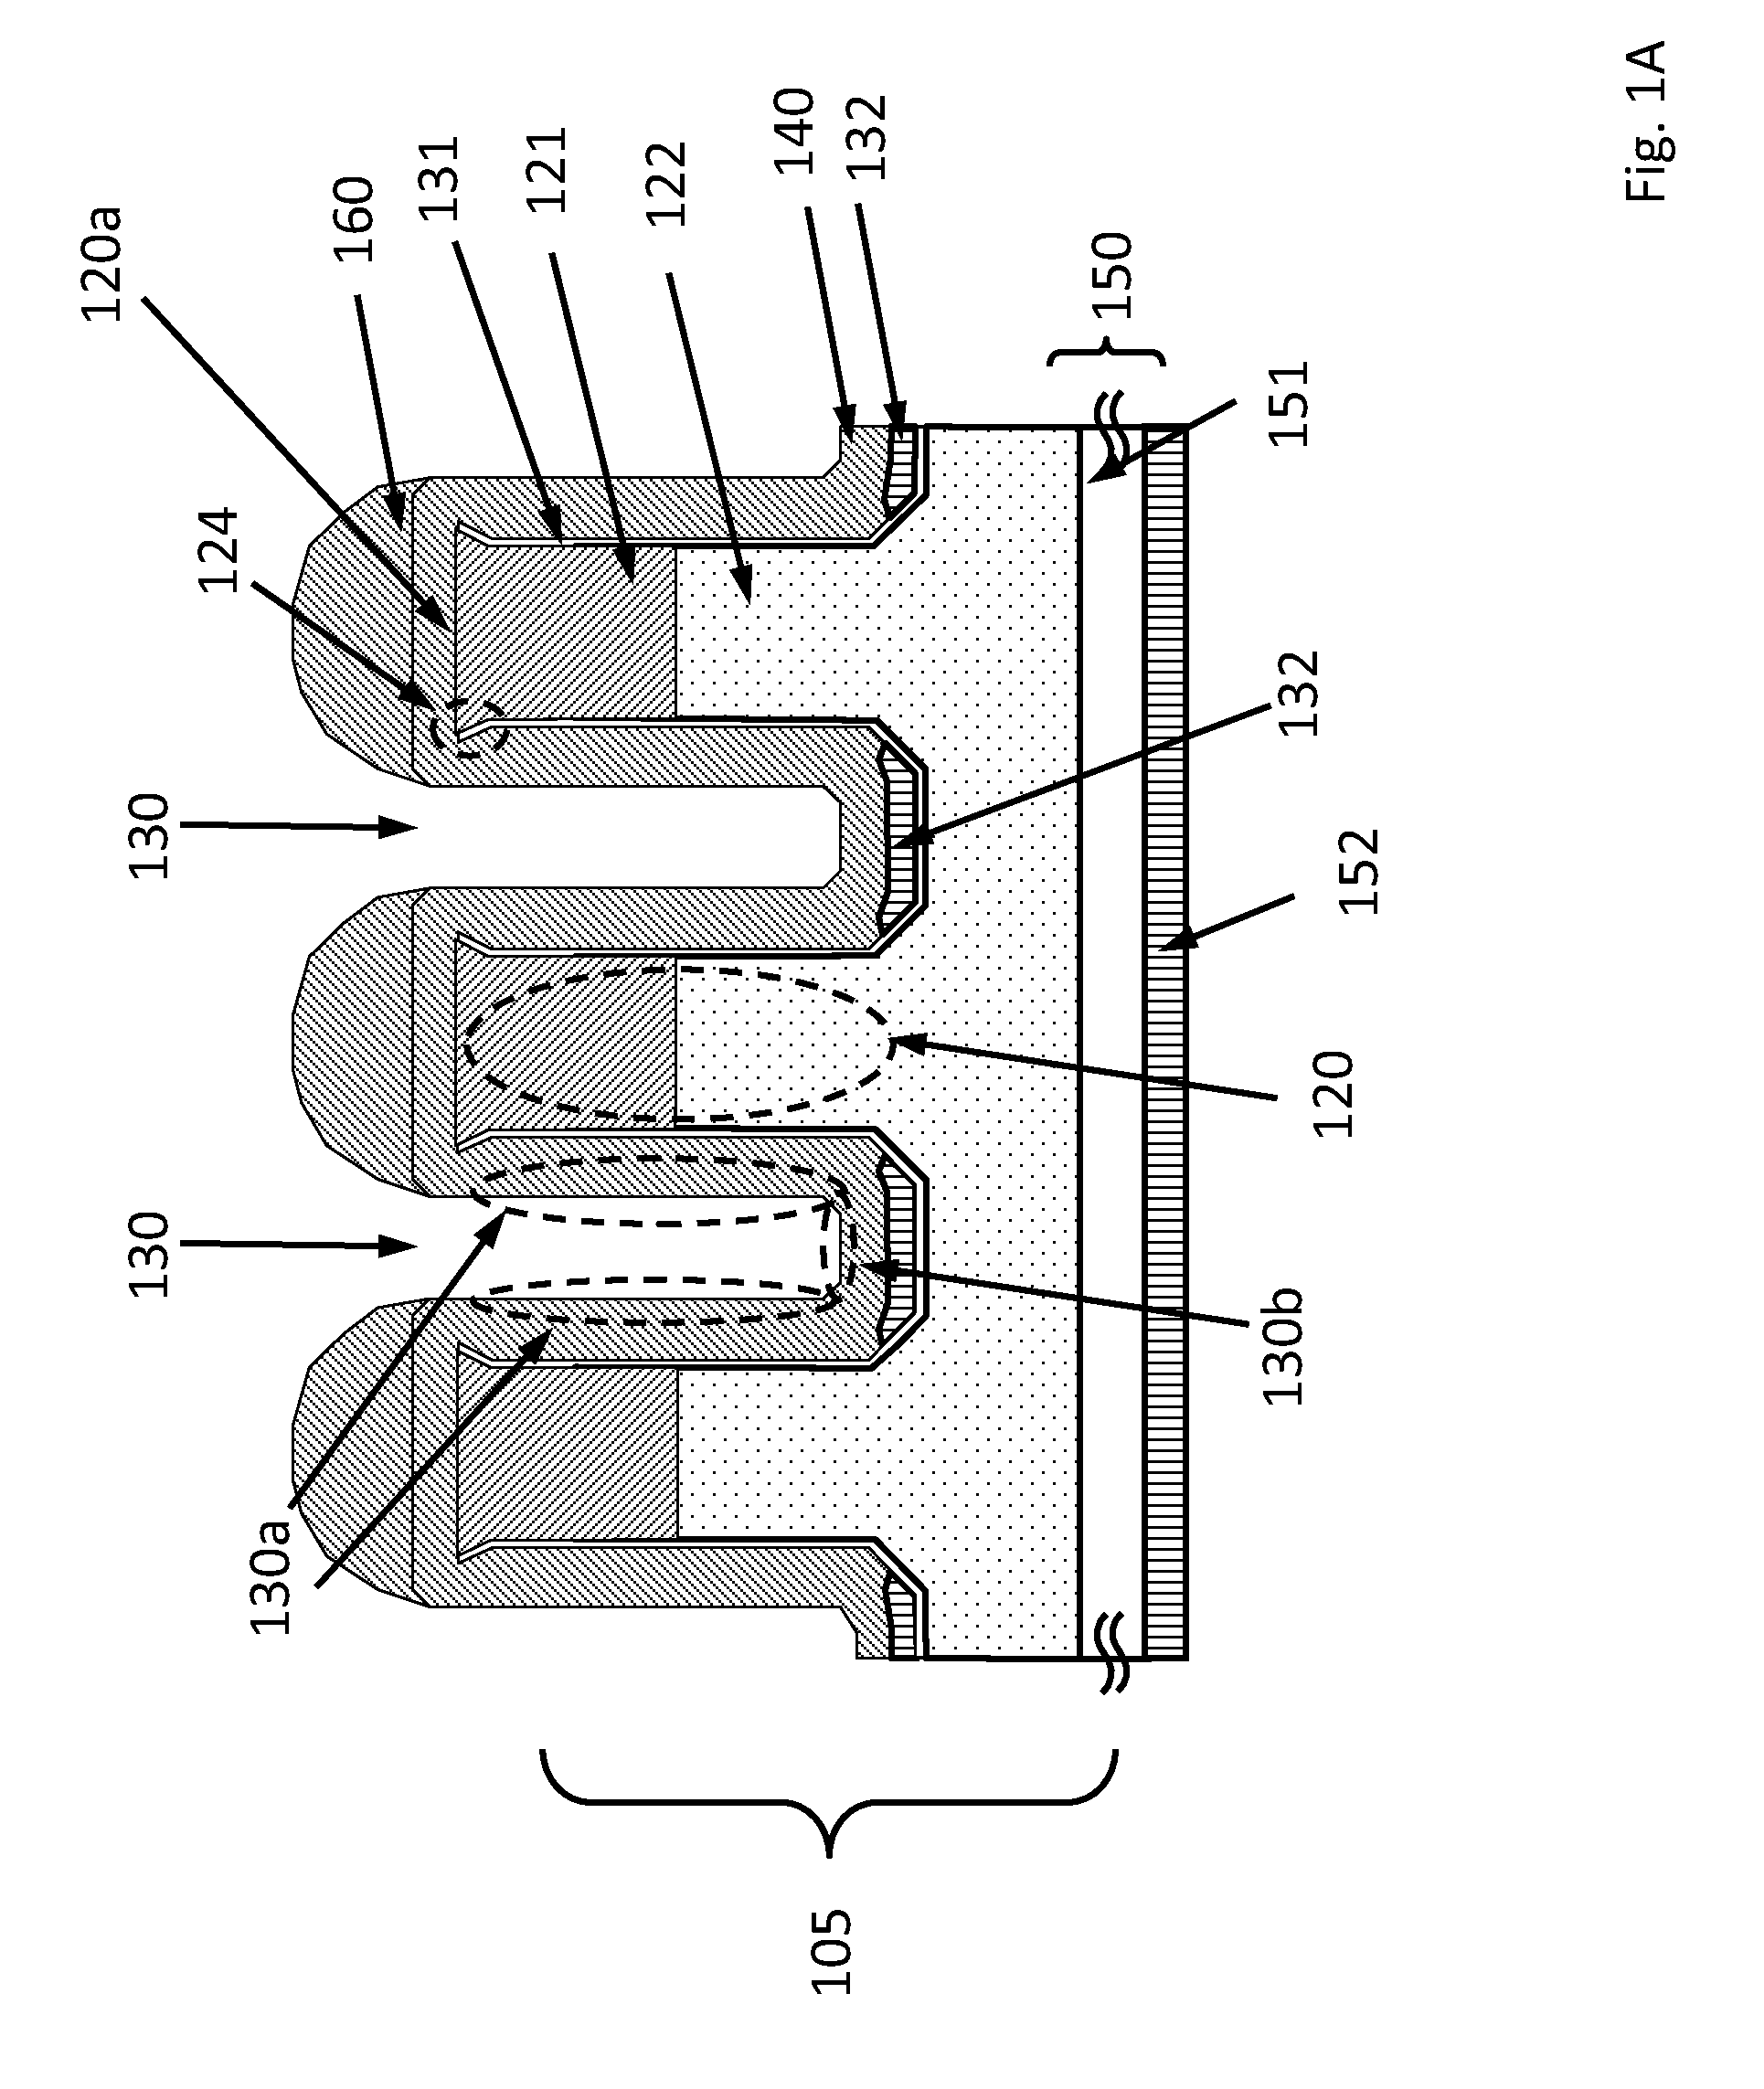 Vertical pillar structured photovoltaic devices with mirrors and optical claddings